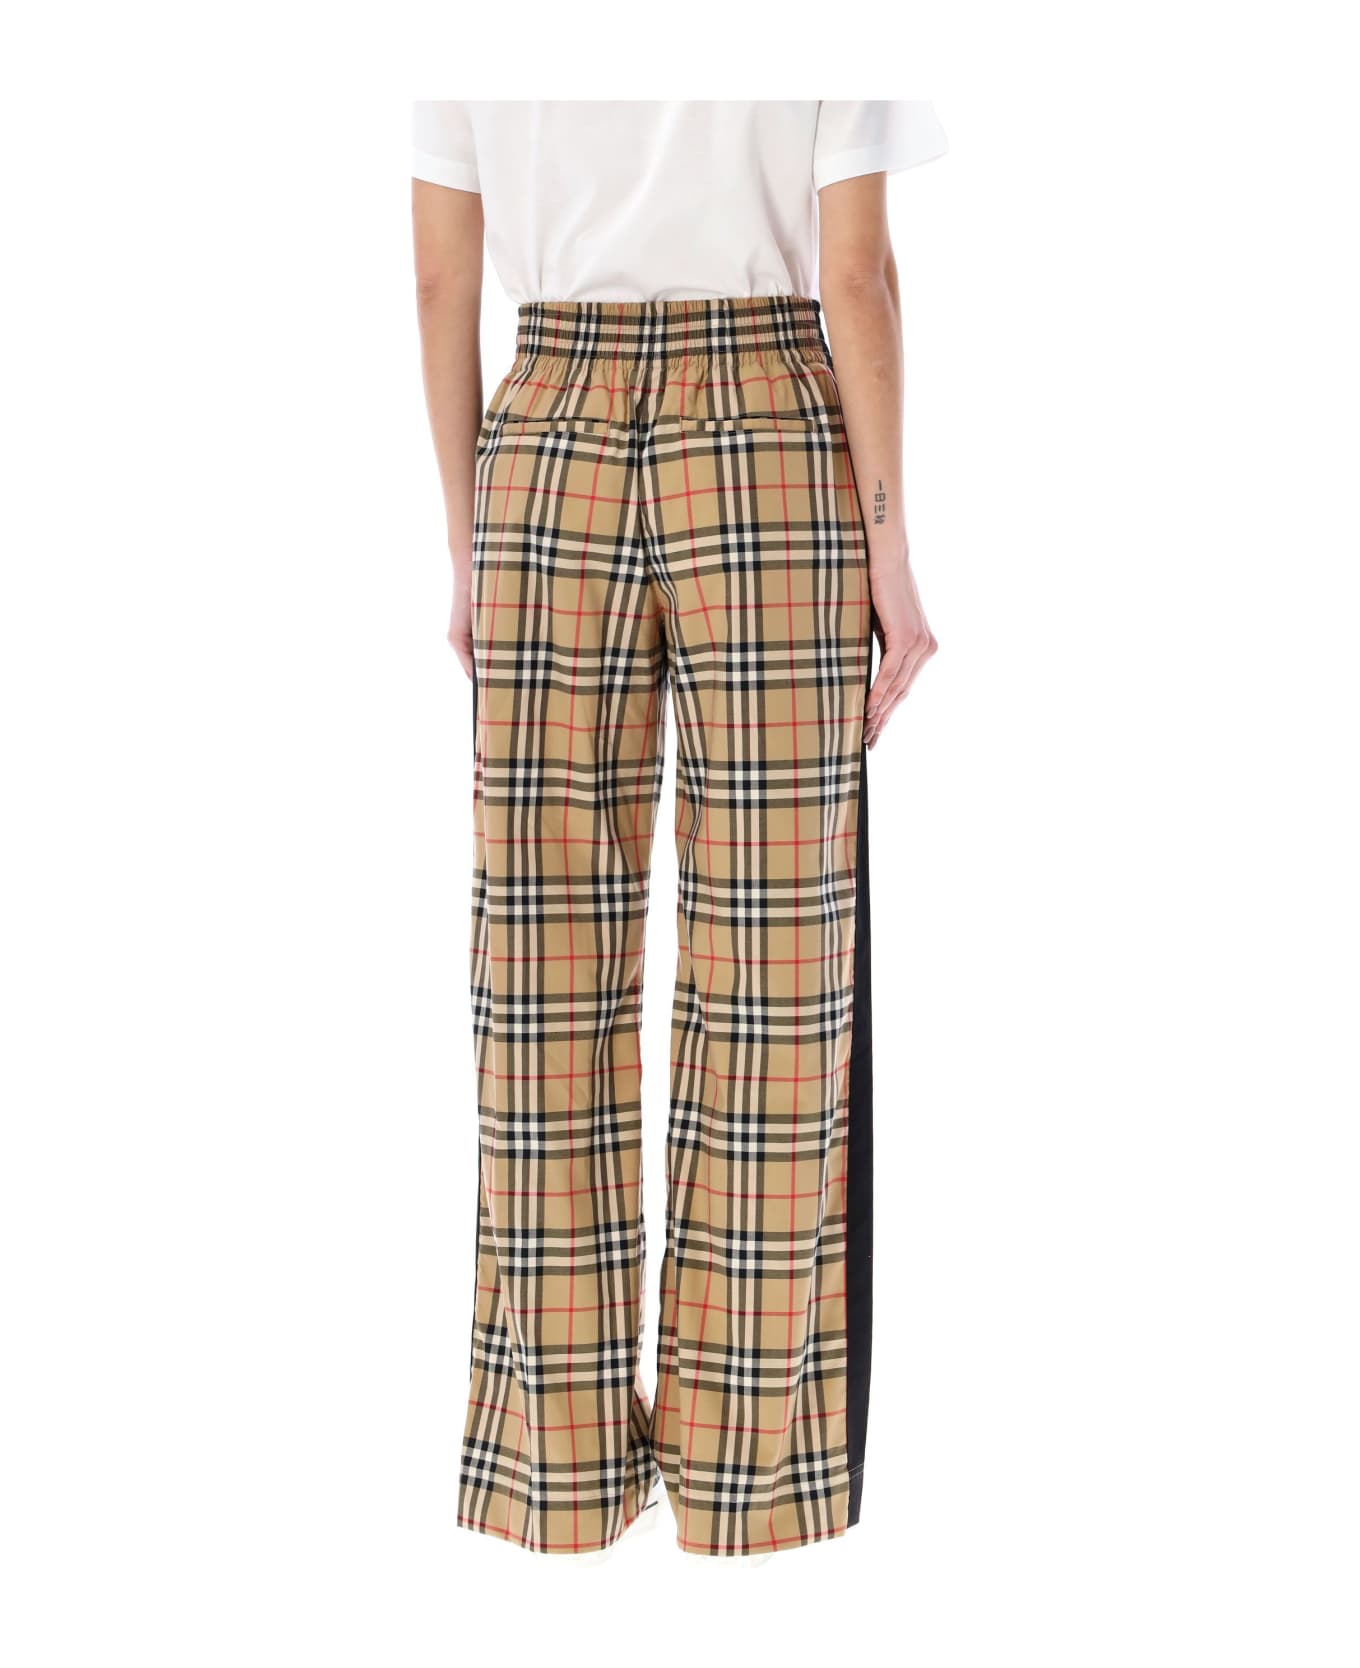 Burberry London Vintage Check Trousers - ARCHIVE BEIGE IP CHK ボトムス